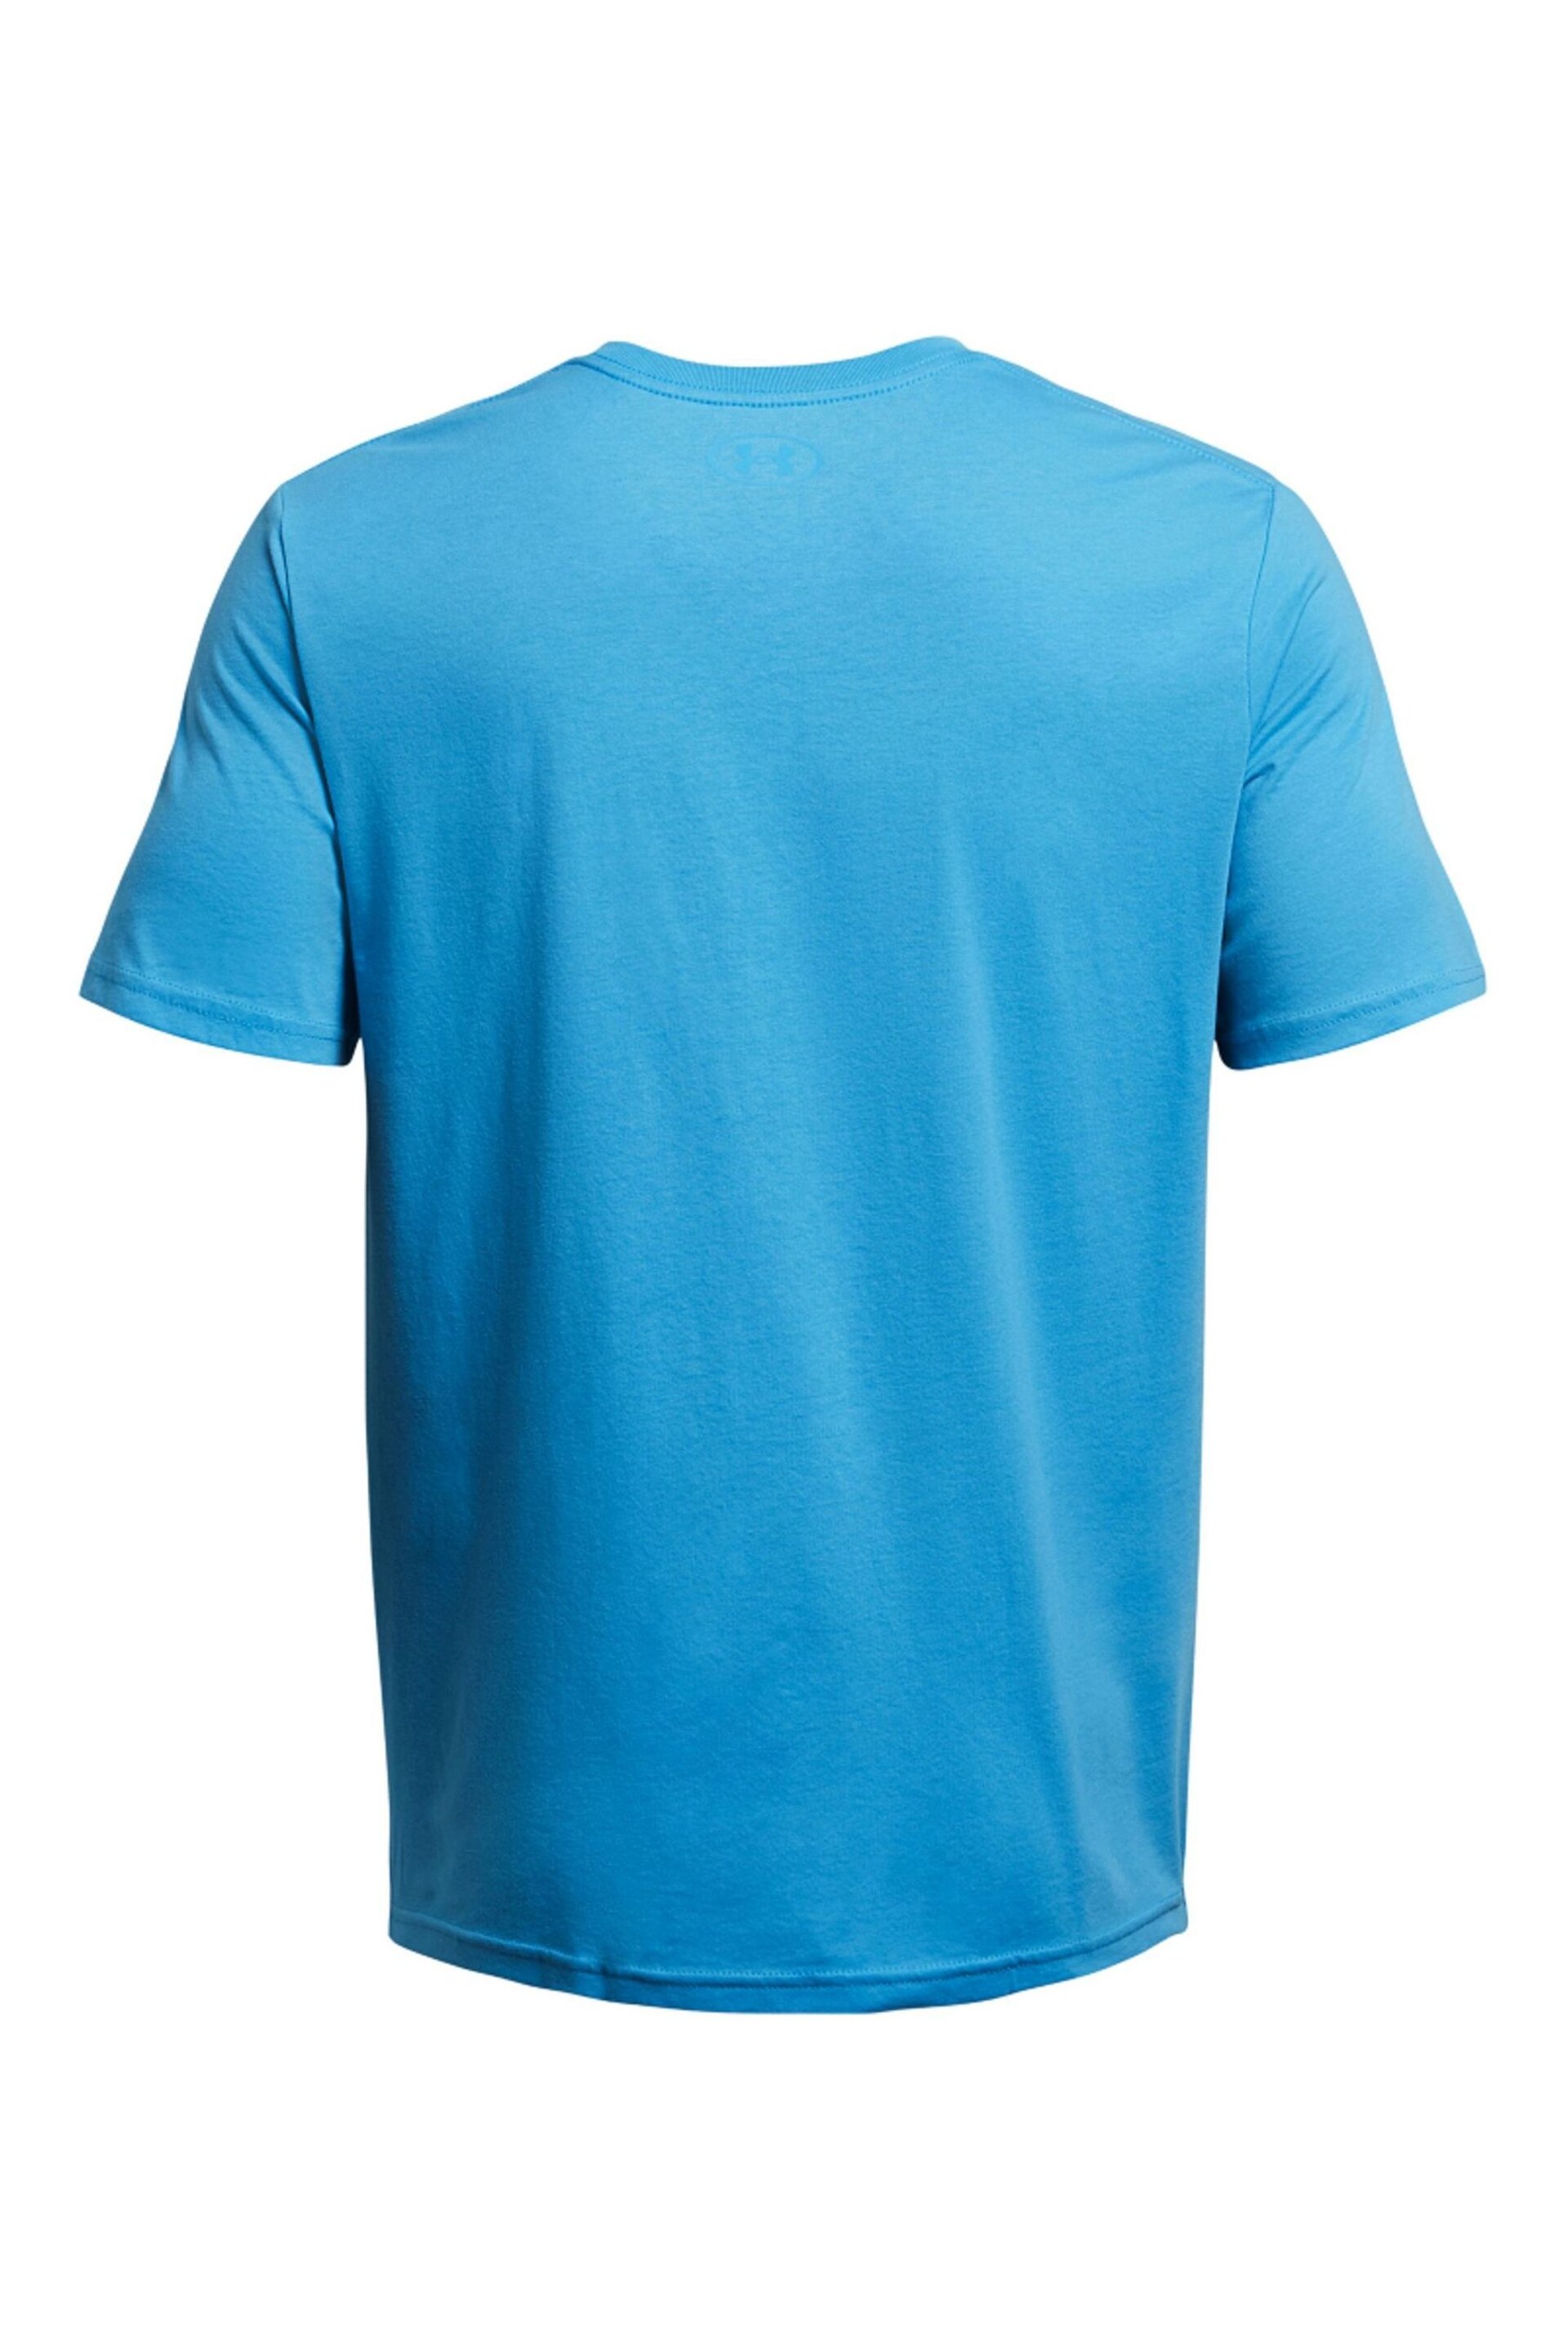 Under Armour Blue Left Chest Short Sleeve T-Shirt - Image 4 of 4